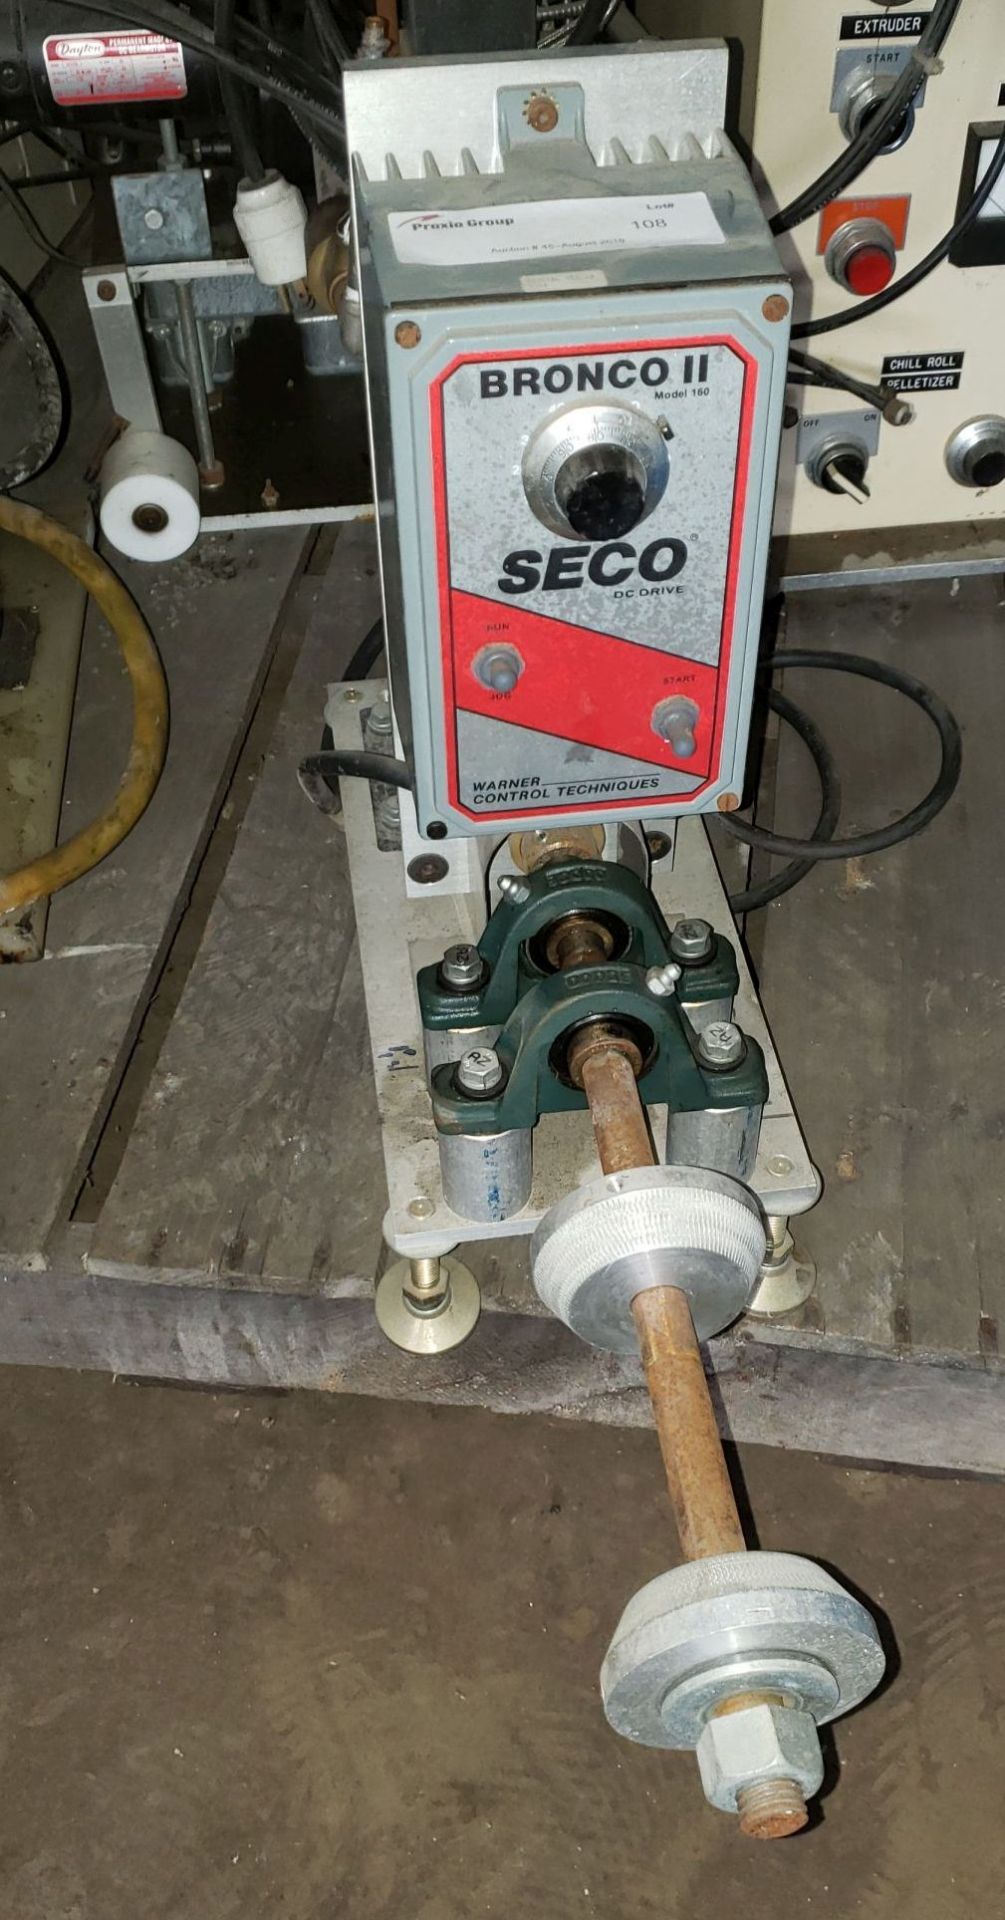 winder with 1/4 hp DC motor, variable speed, with Bronco II SECO controls, with approximately 6"